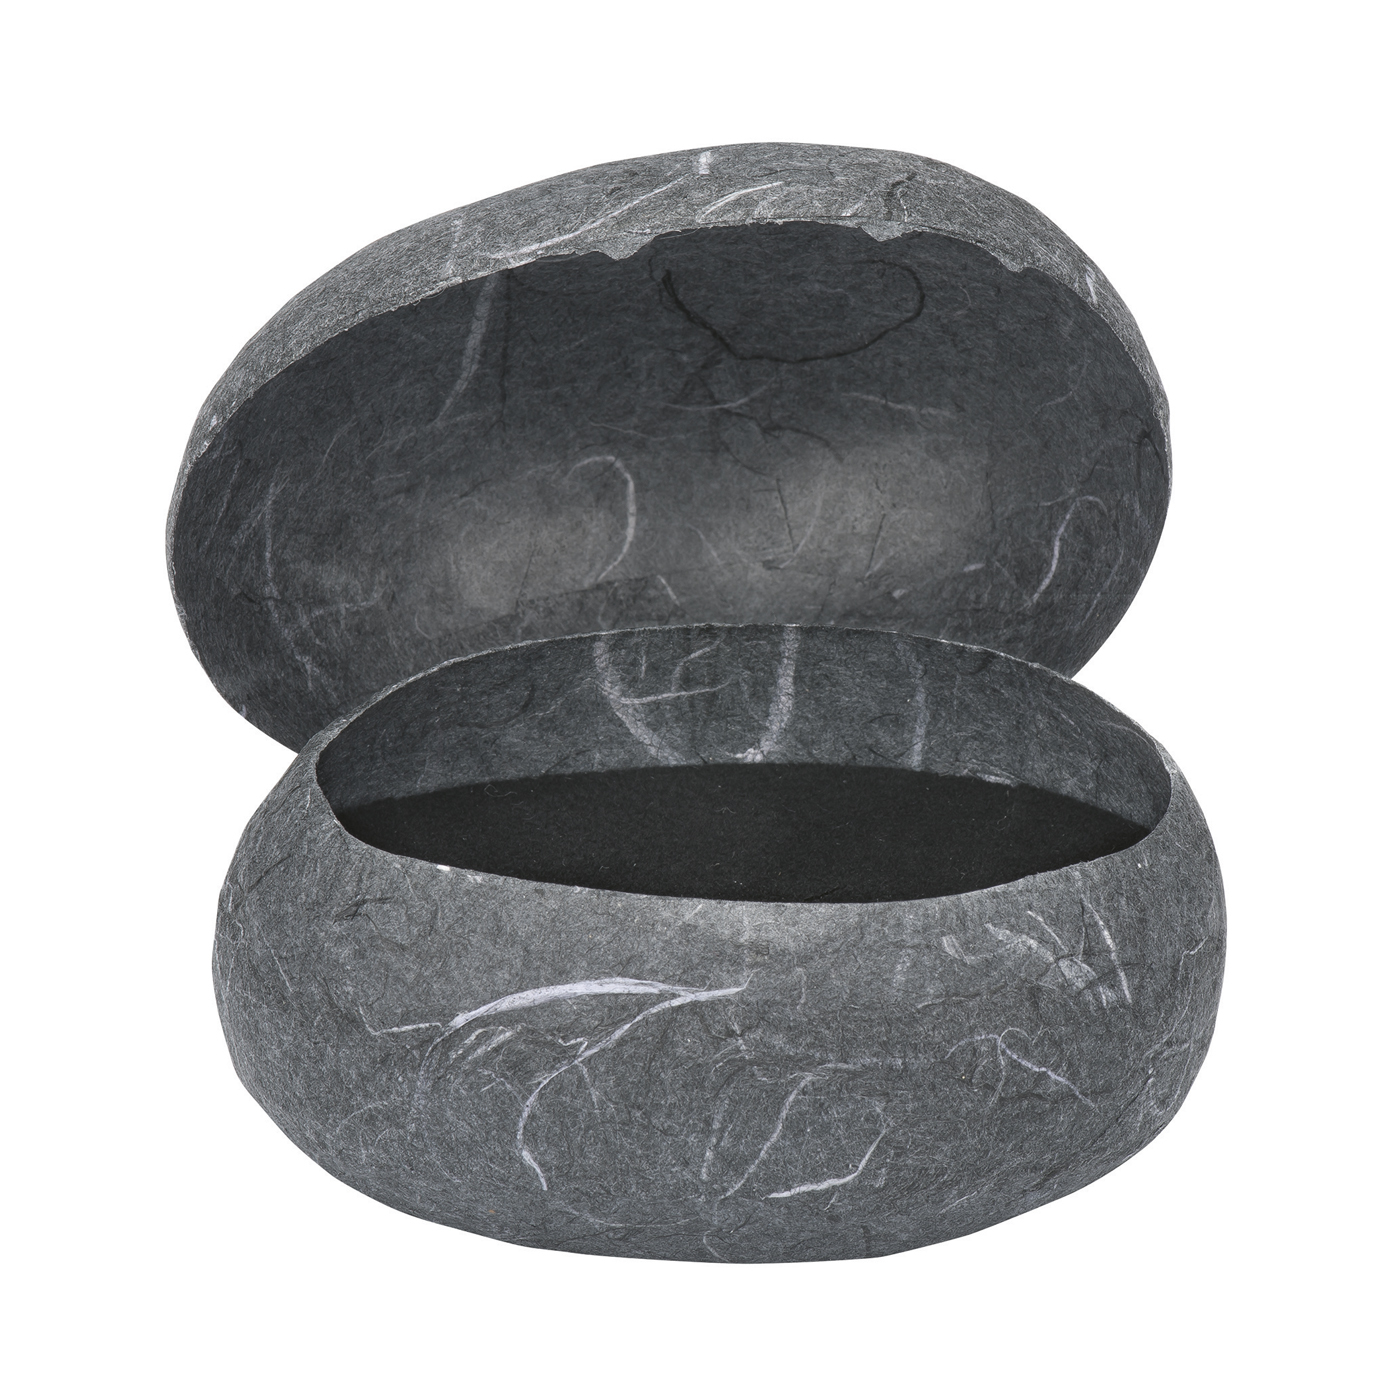 Jewellery Packaging "Stone", Anthracite Mottled,100x70x60 mm - 1 piece